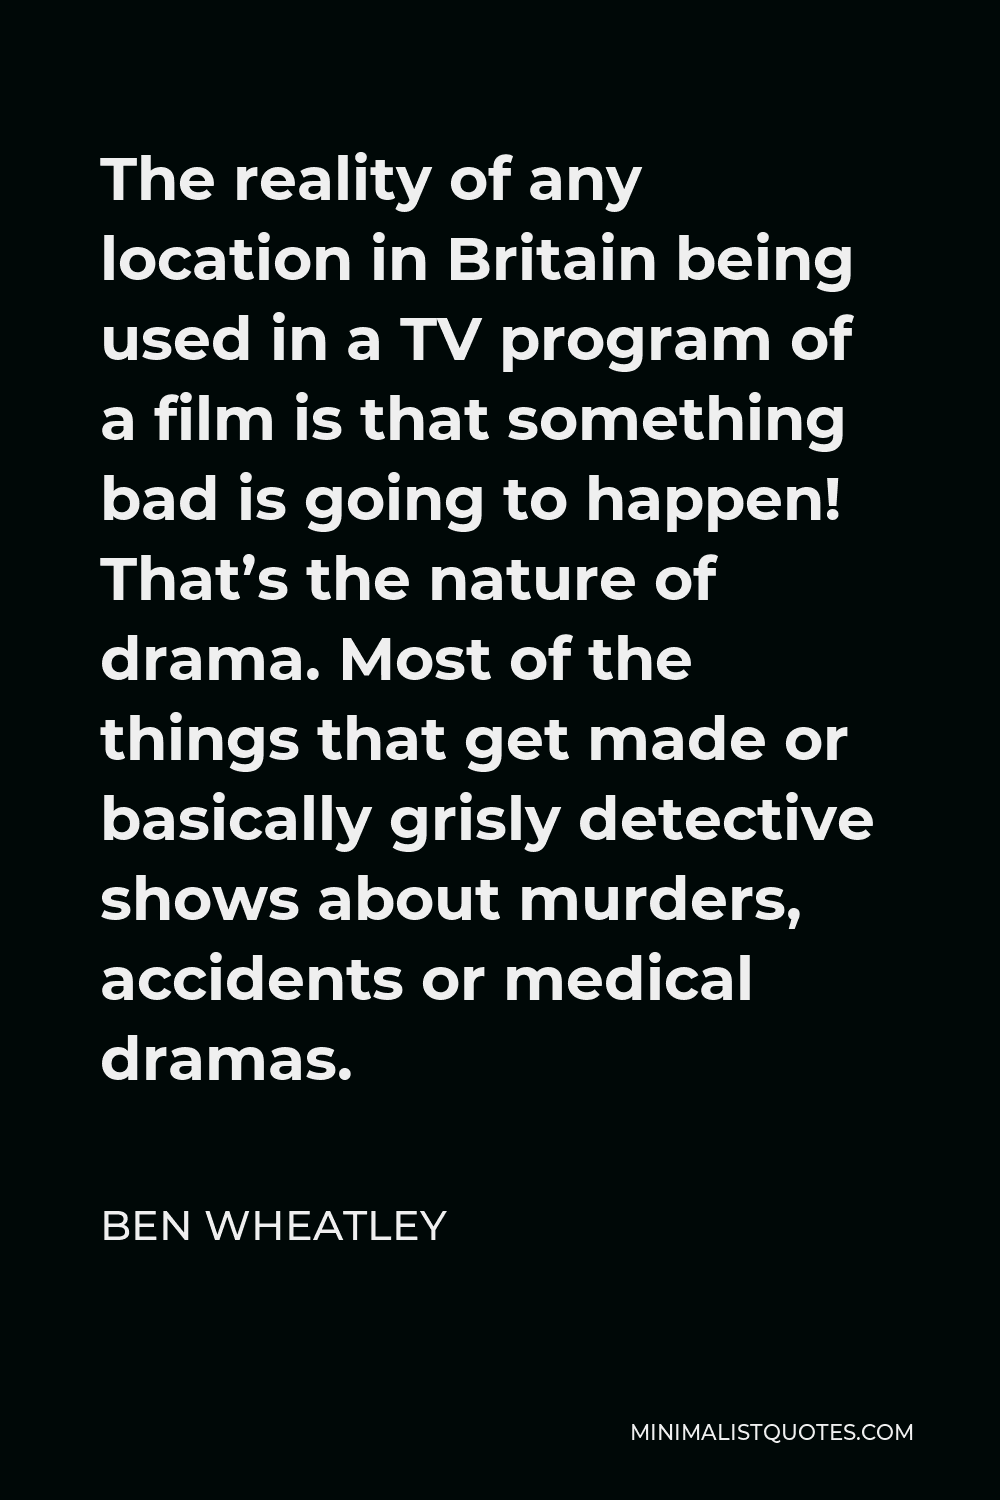 Ben Wheatley Quote - The reality of any location in Britain being used in a TV program of a film is that something bad is going to happen! That’s the nature of drama. Most of the things that get made or basically grisly detective shows about murders, accidents or medical dramas.